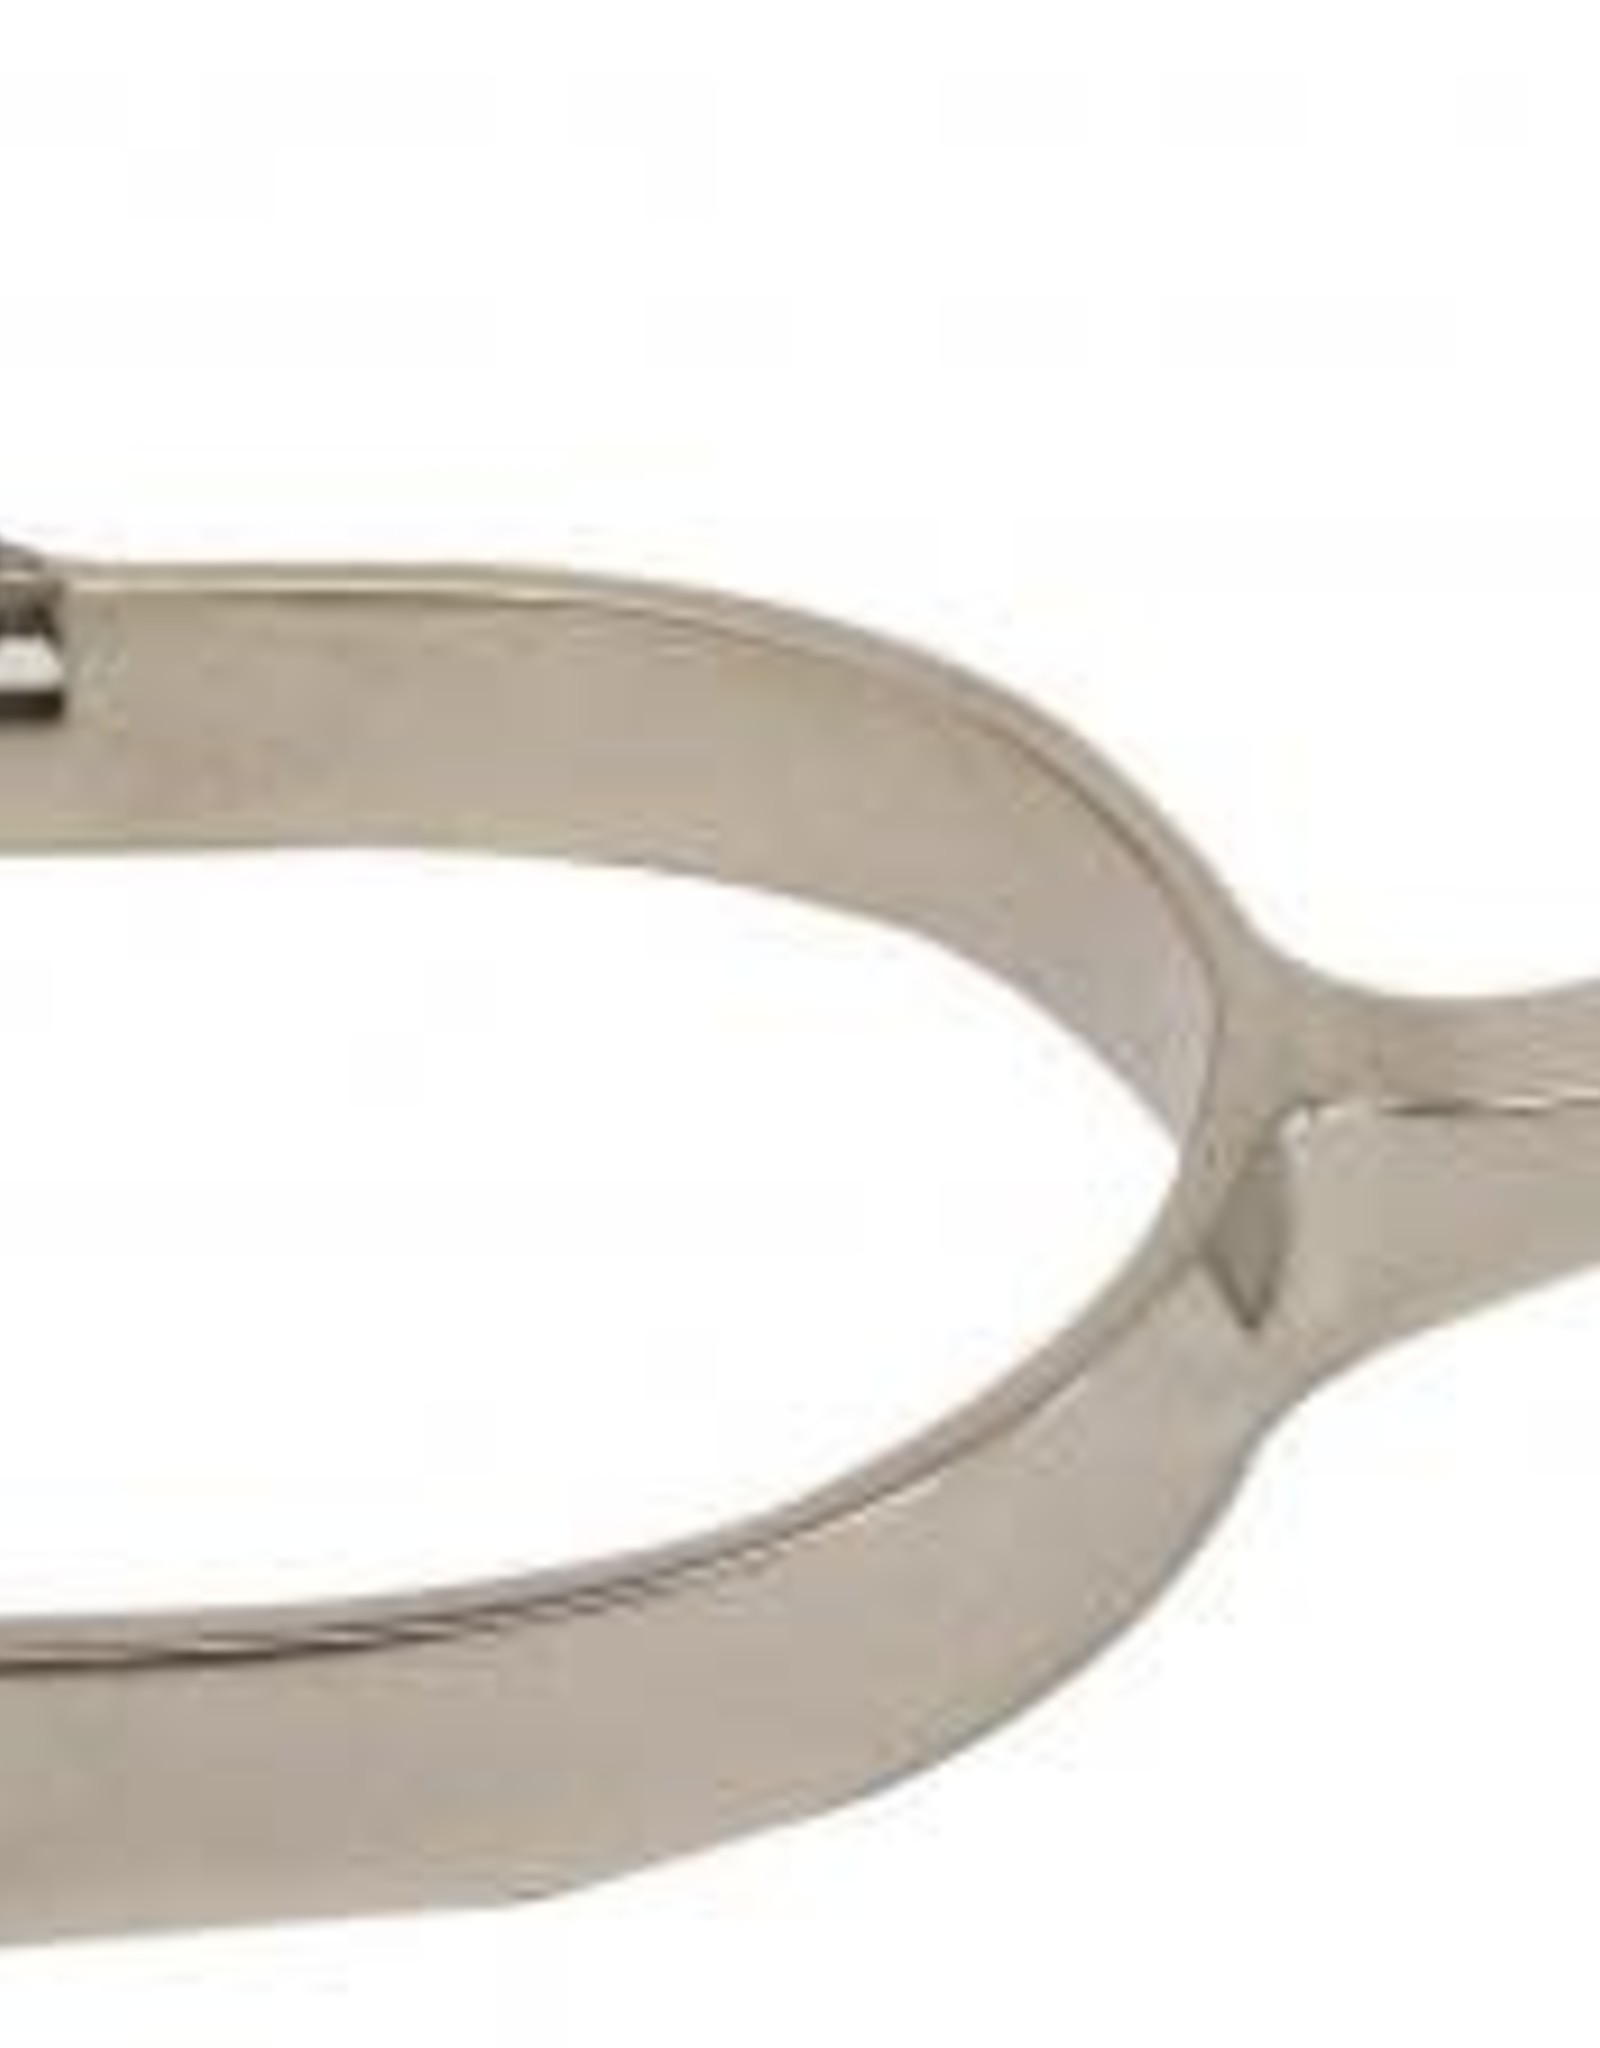 Showcraft Triple S Band Roping Spur - Ladies 5/8"